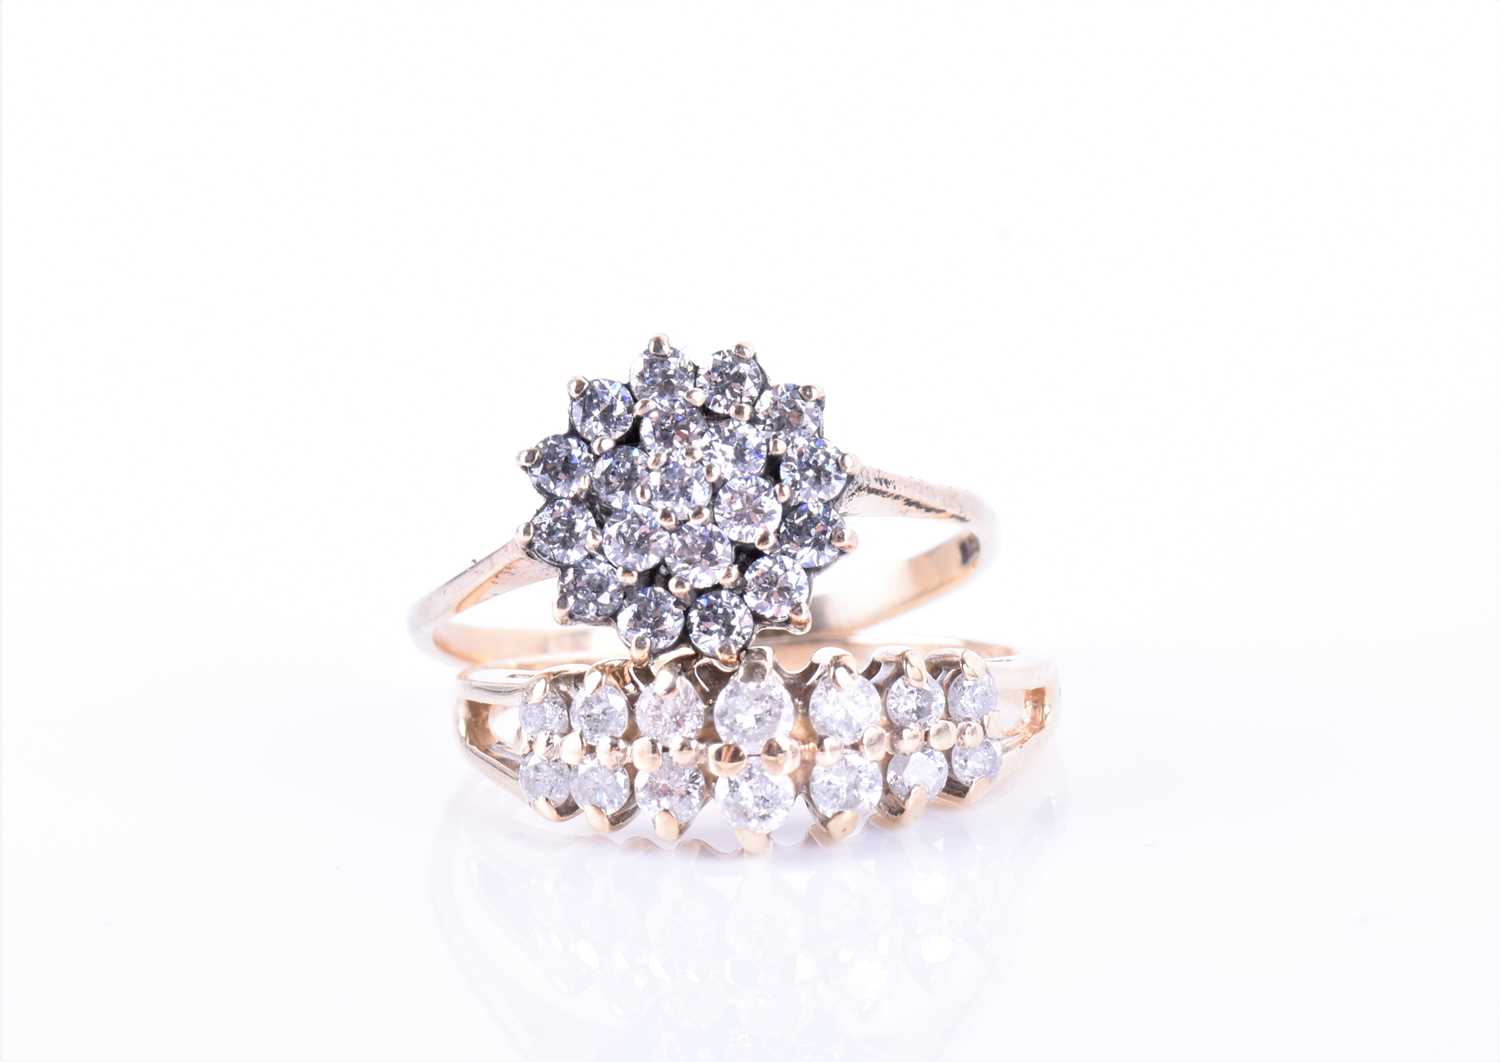 A 9ct yellow gold and diamond cluster ringsize M 1/2, together with a 14k yellow gold ring step-